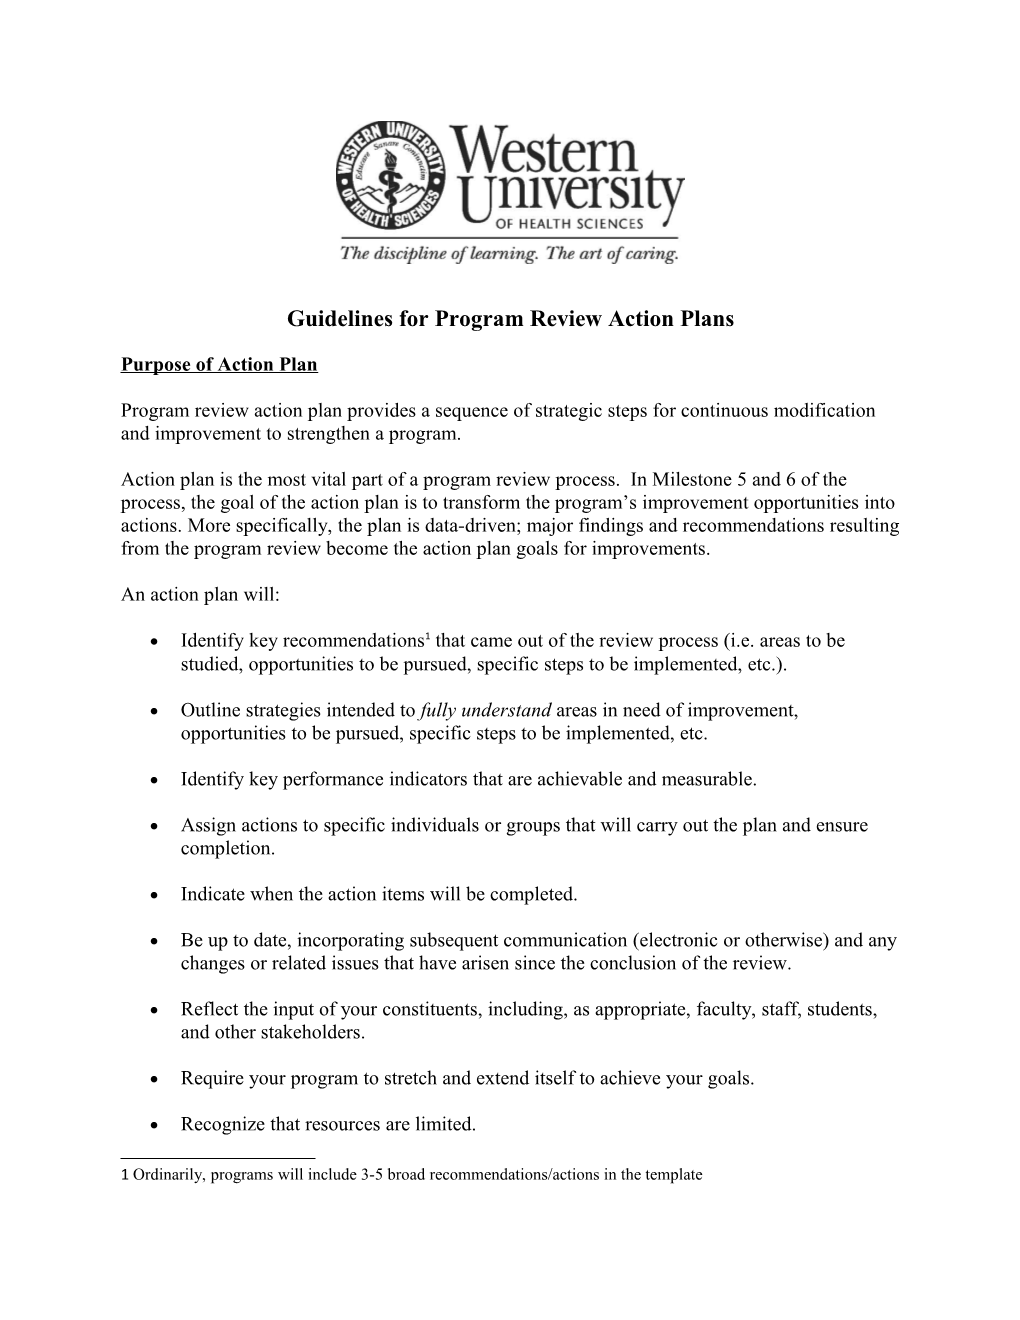 Guidelines for Program Review Action Plans